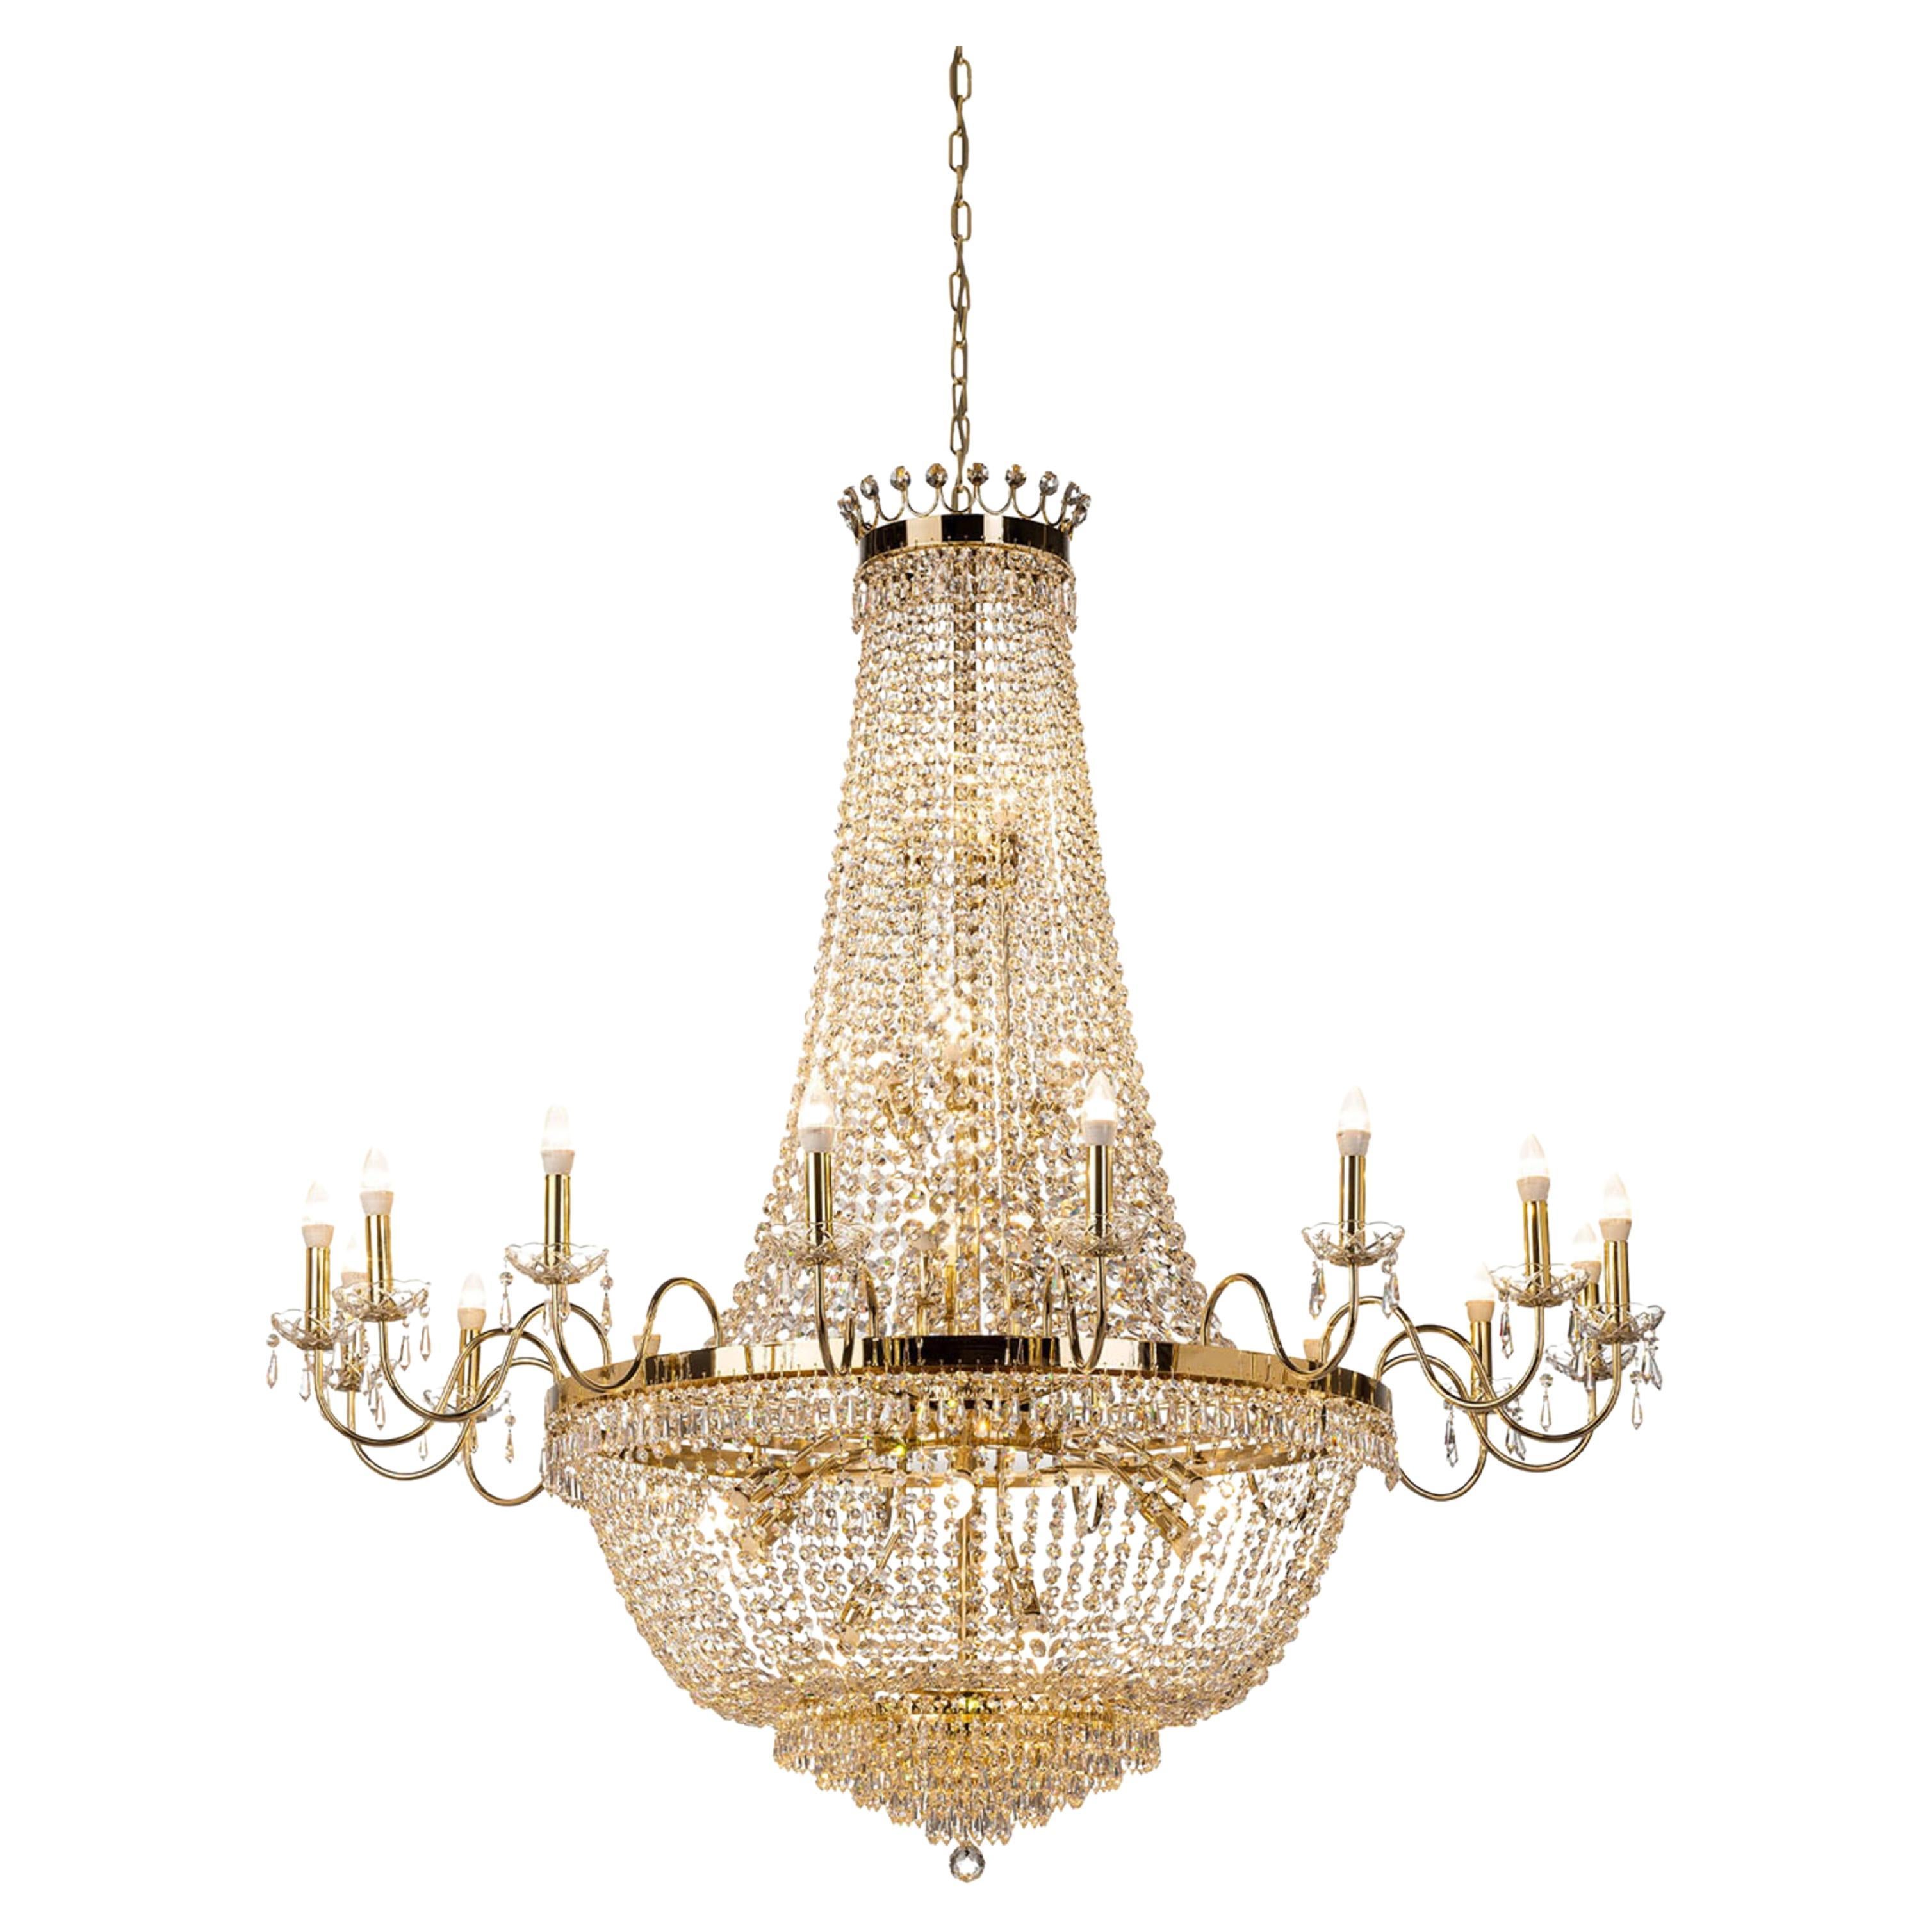 King's Chandelier For Sale